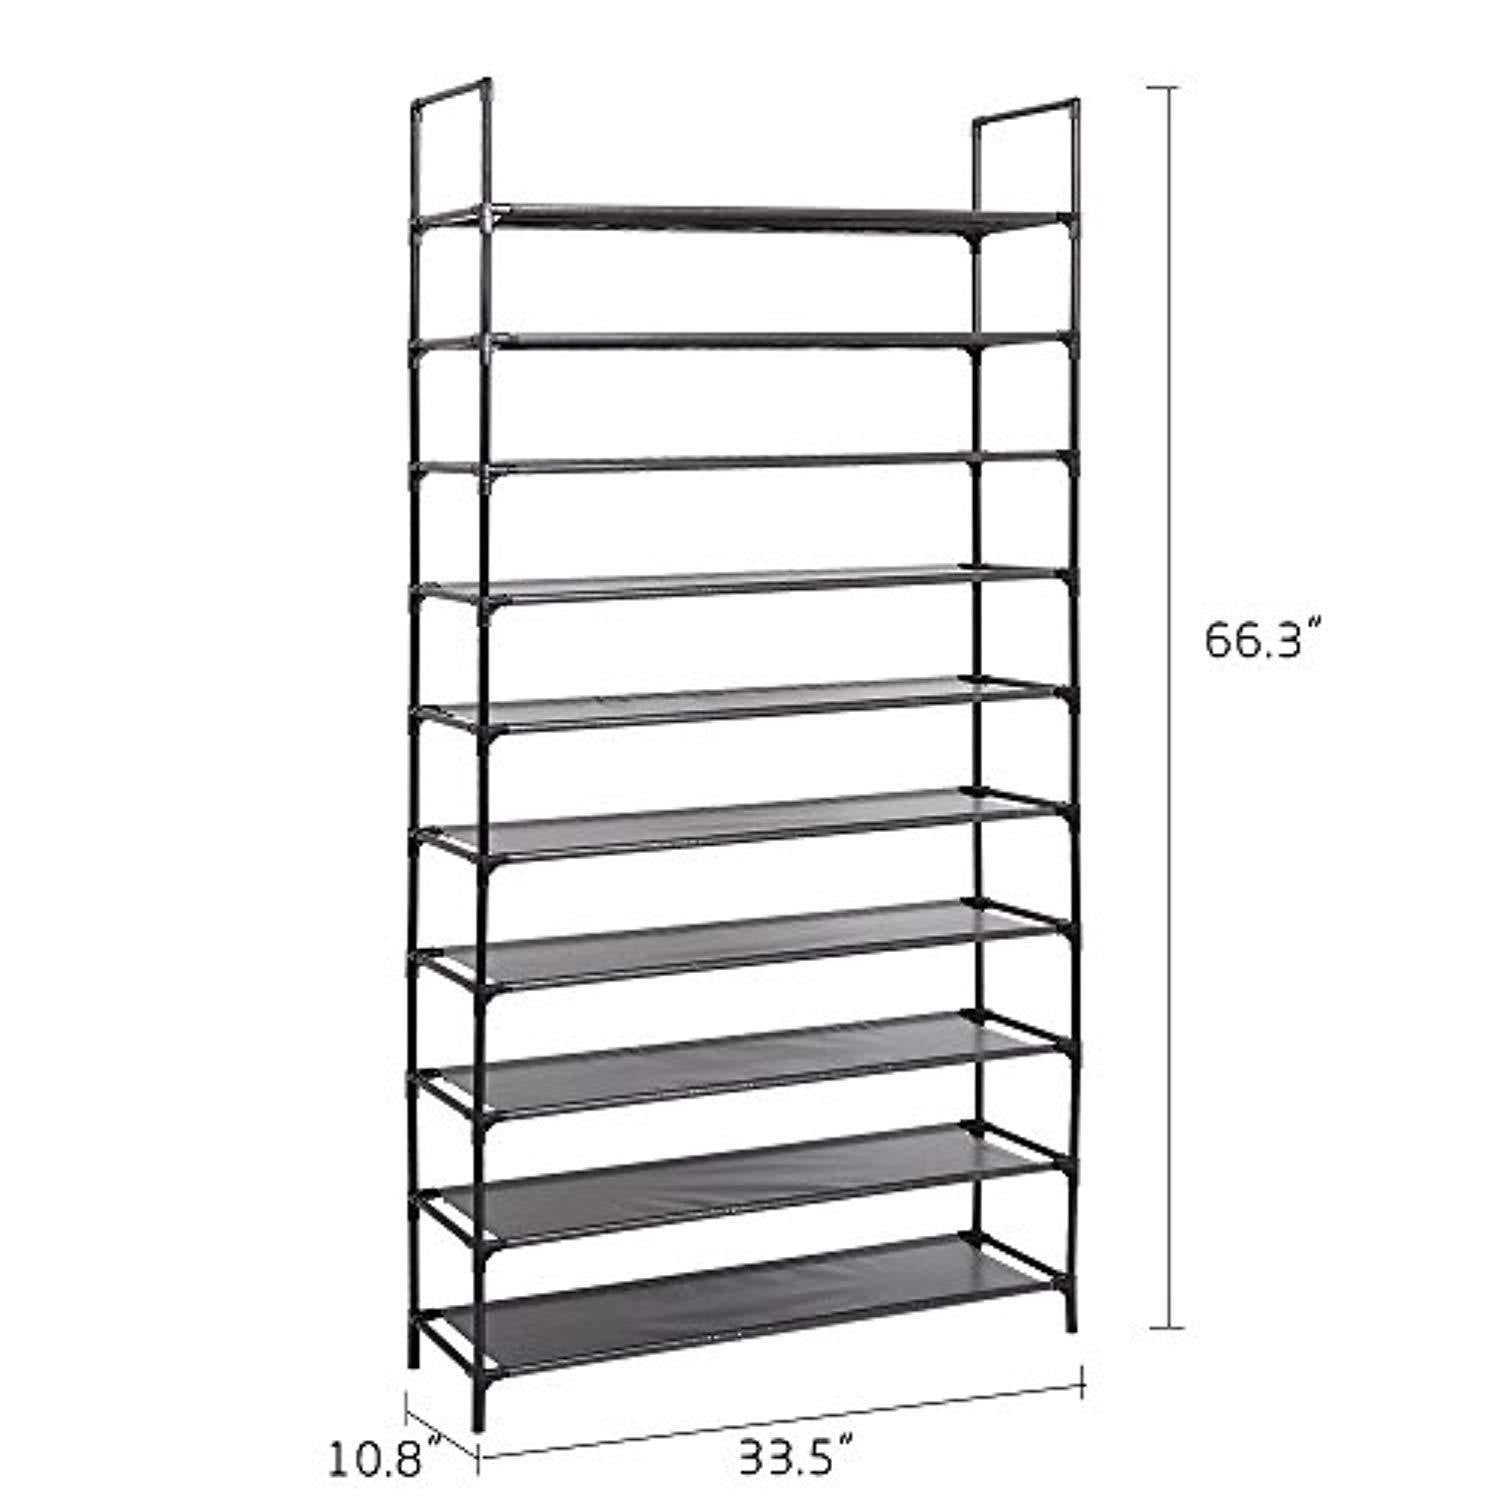 Bosonshop 10 Tiers Shoe Rack Free Standing Non Woven Fabric Shoe Tower Organizer Cabinet for Entryway